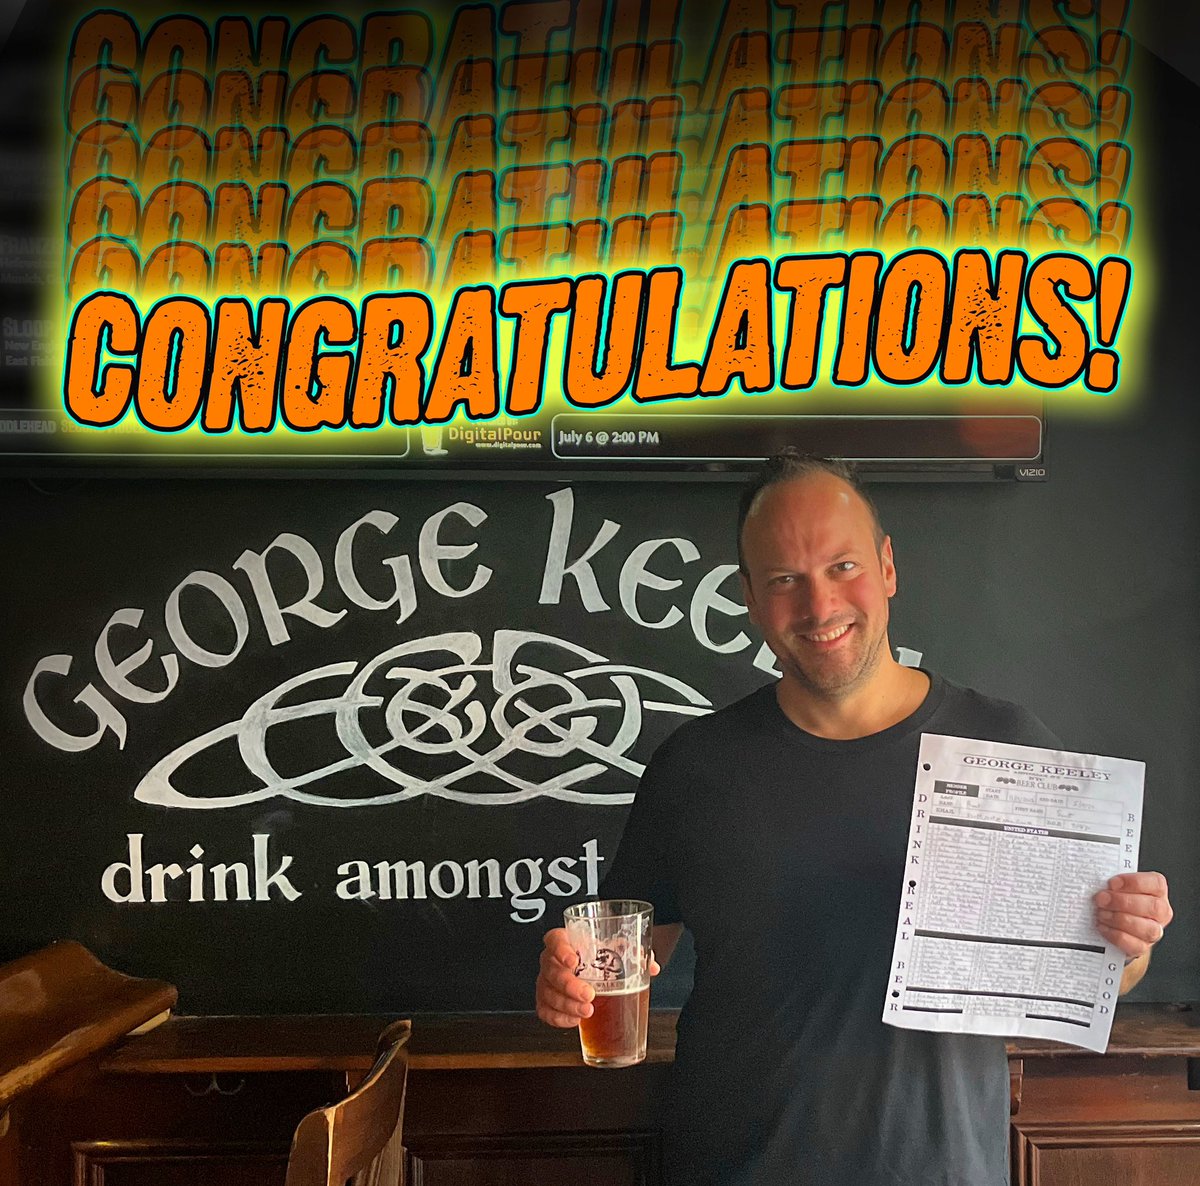 It's #BeerClub Monday...and we can celebrate a brand new GKBC member! Congrats to our pal @sroot17 for hitting 💯👏👏👏🍺💪 #whosnext #georgekeeley #gknyc #beerisgood #shutupanddrink #drinkamongstfriends #craftbeerbar #neighborhoodbar #uwsnyc #cheers #publife #challengecompleted